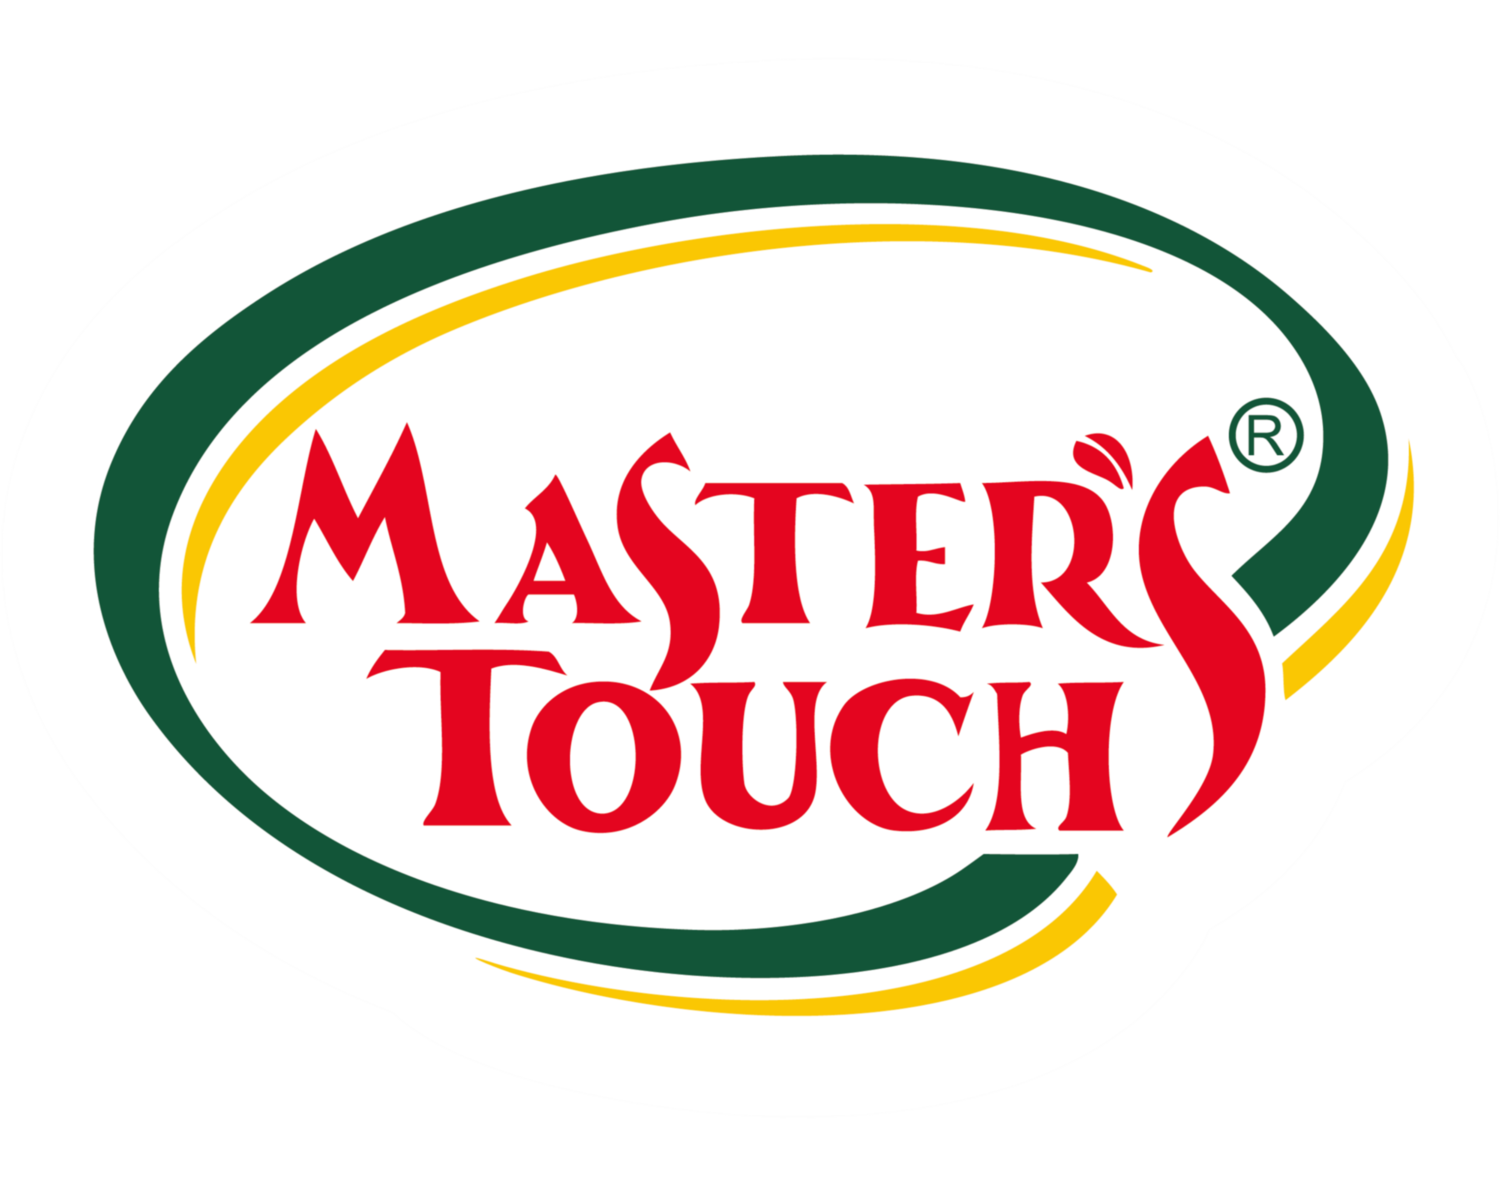 MASTERS TOUCH